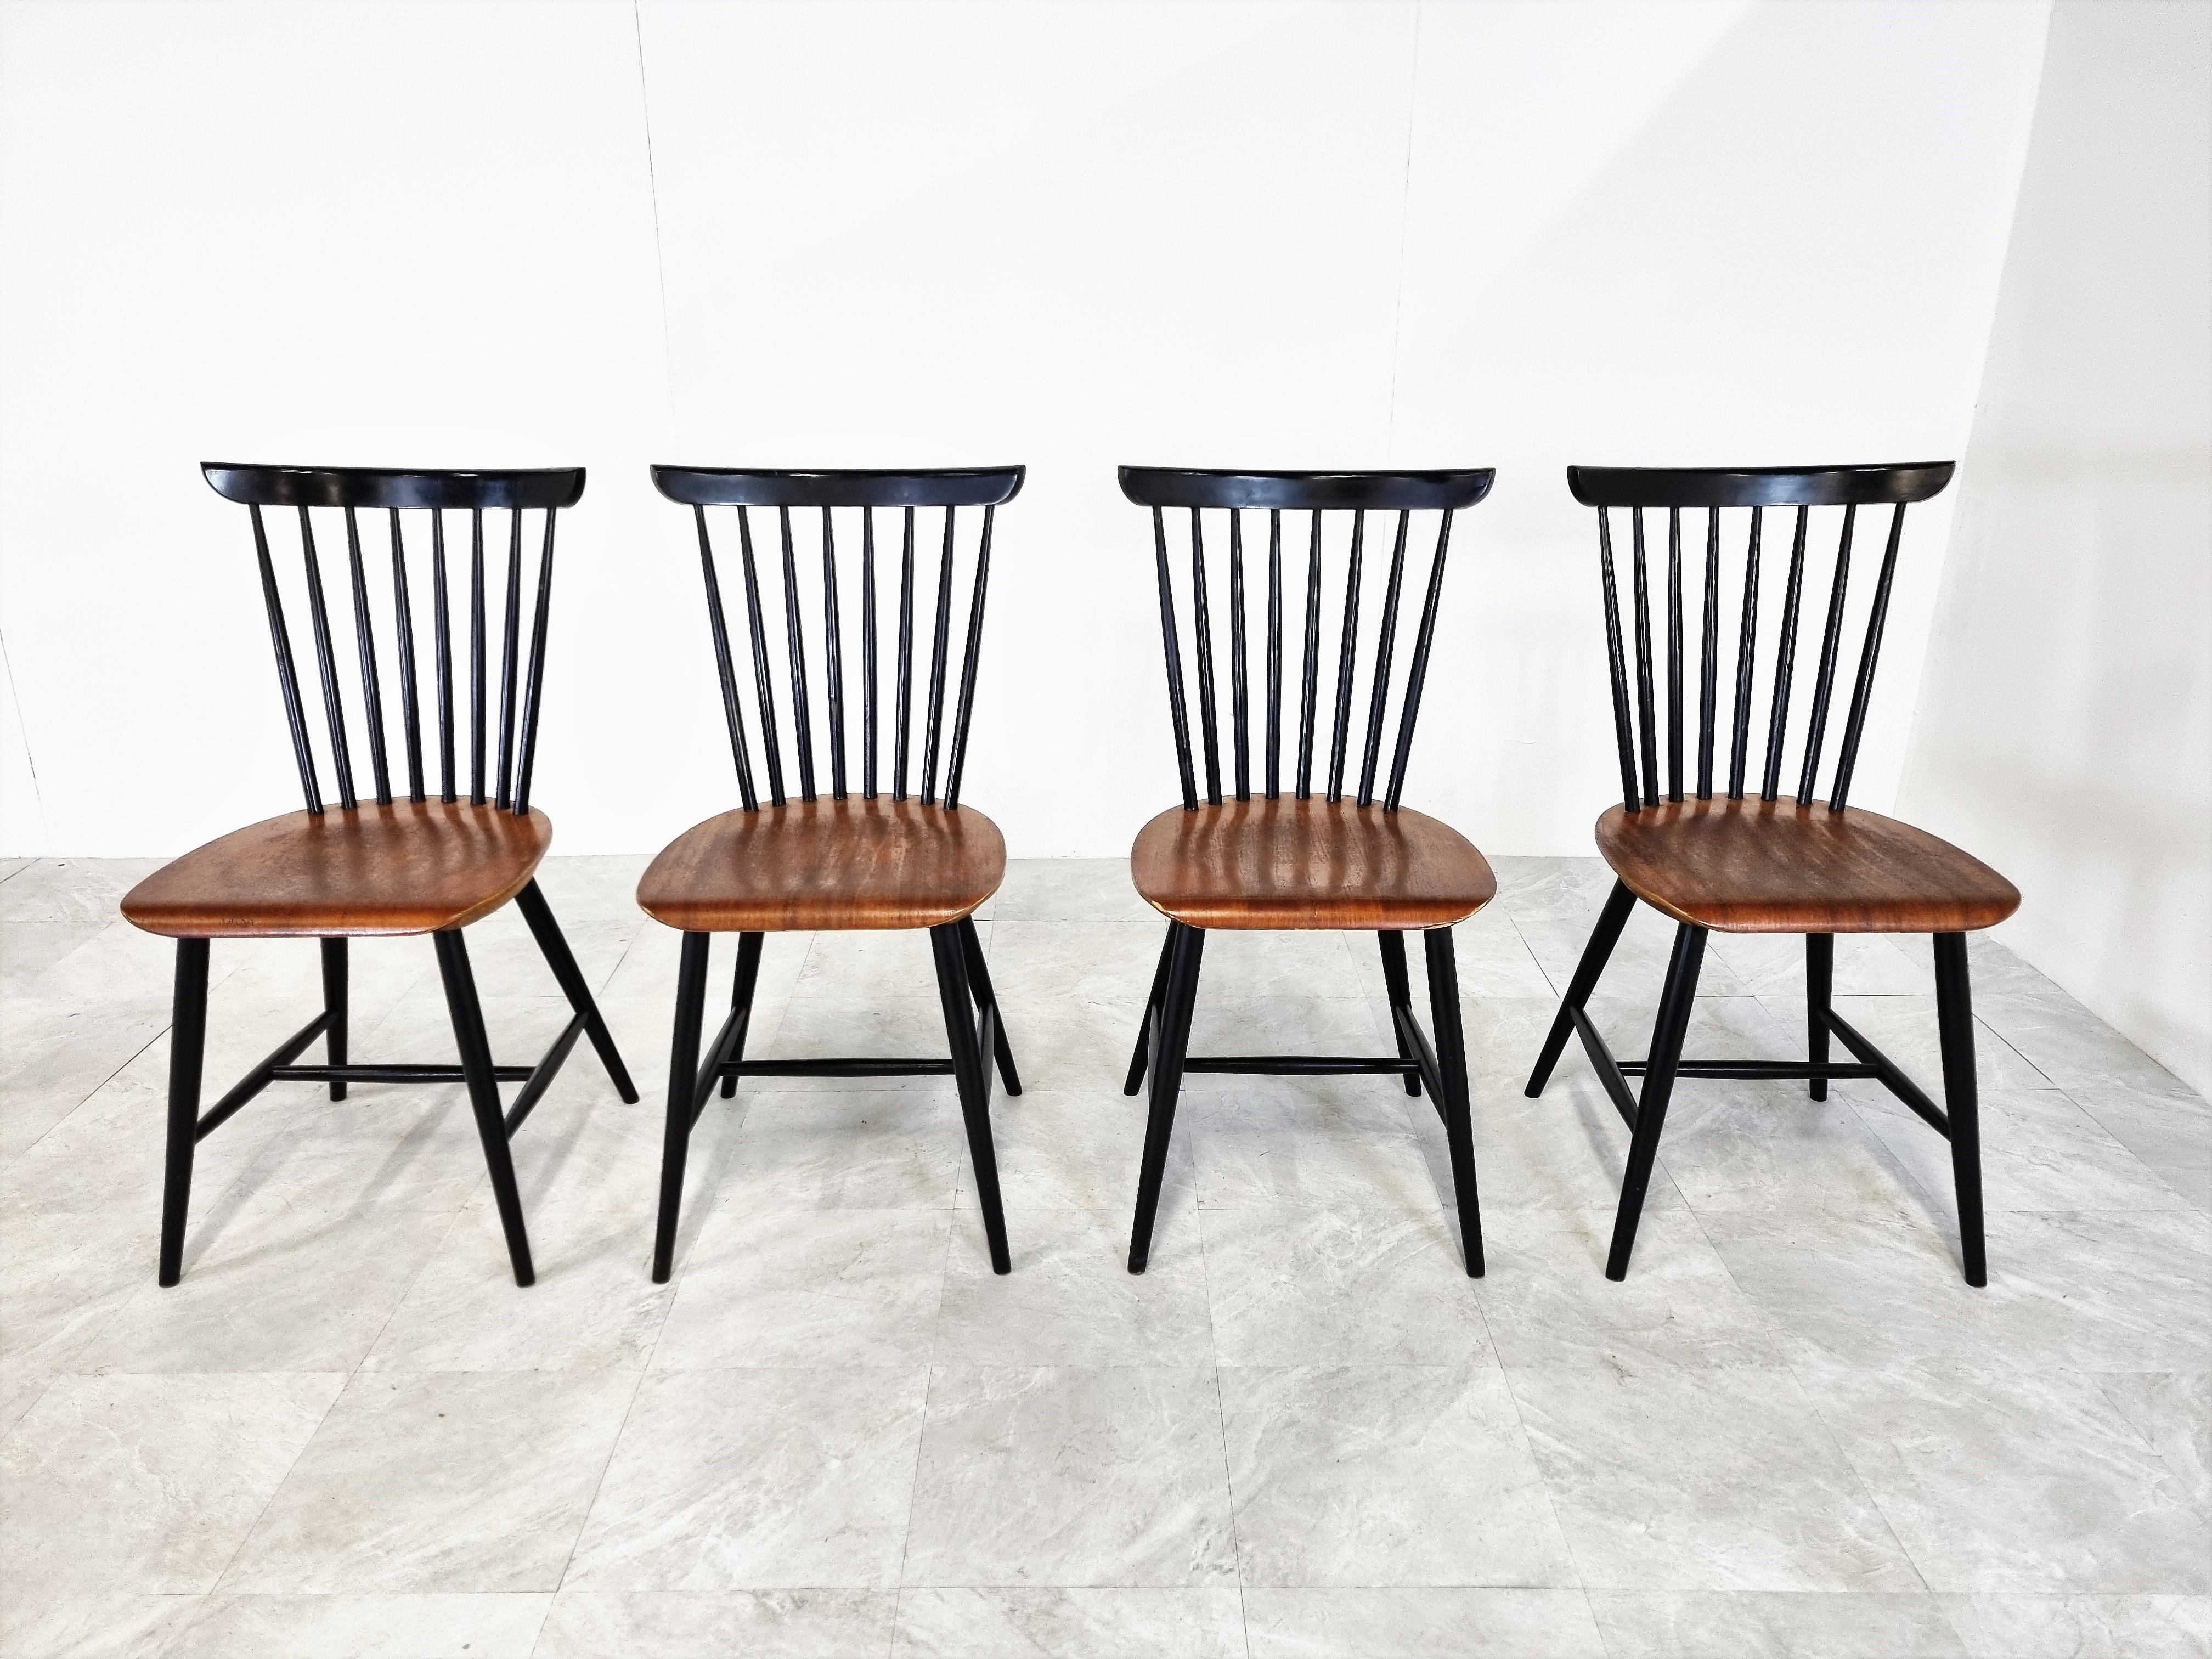 Set of 4 spindle back dining chairs designed by Sven Erik Fryklund for Haga Fors Mobel.

Elegant design with the curled seat lip and the spindle back.

Beautiful vintage condition.

1960s - Sweden

Dimensions: 
Height: 82cm/32.28